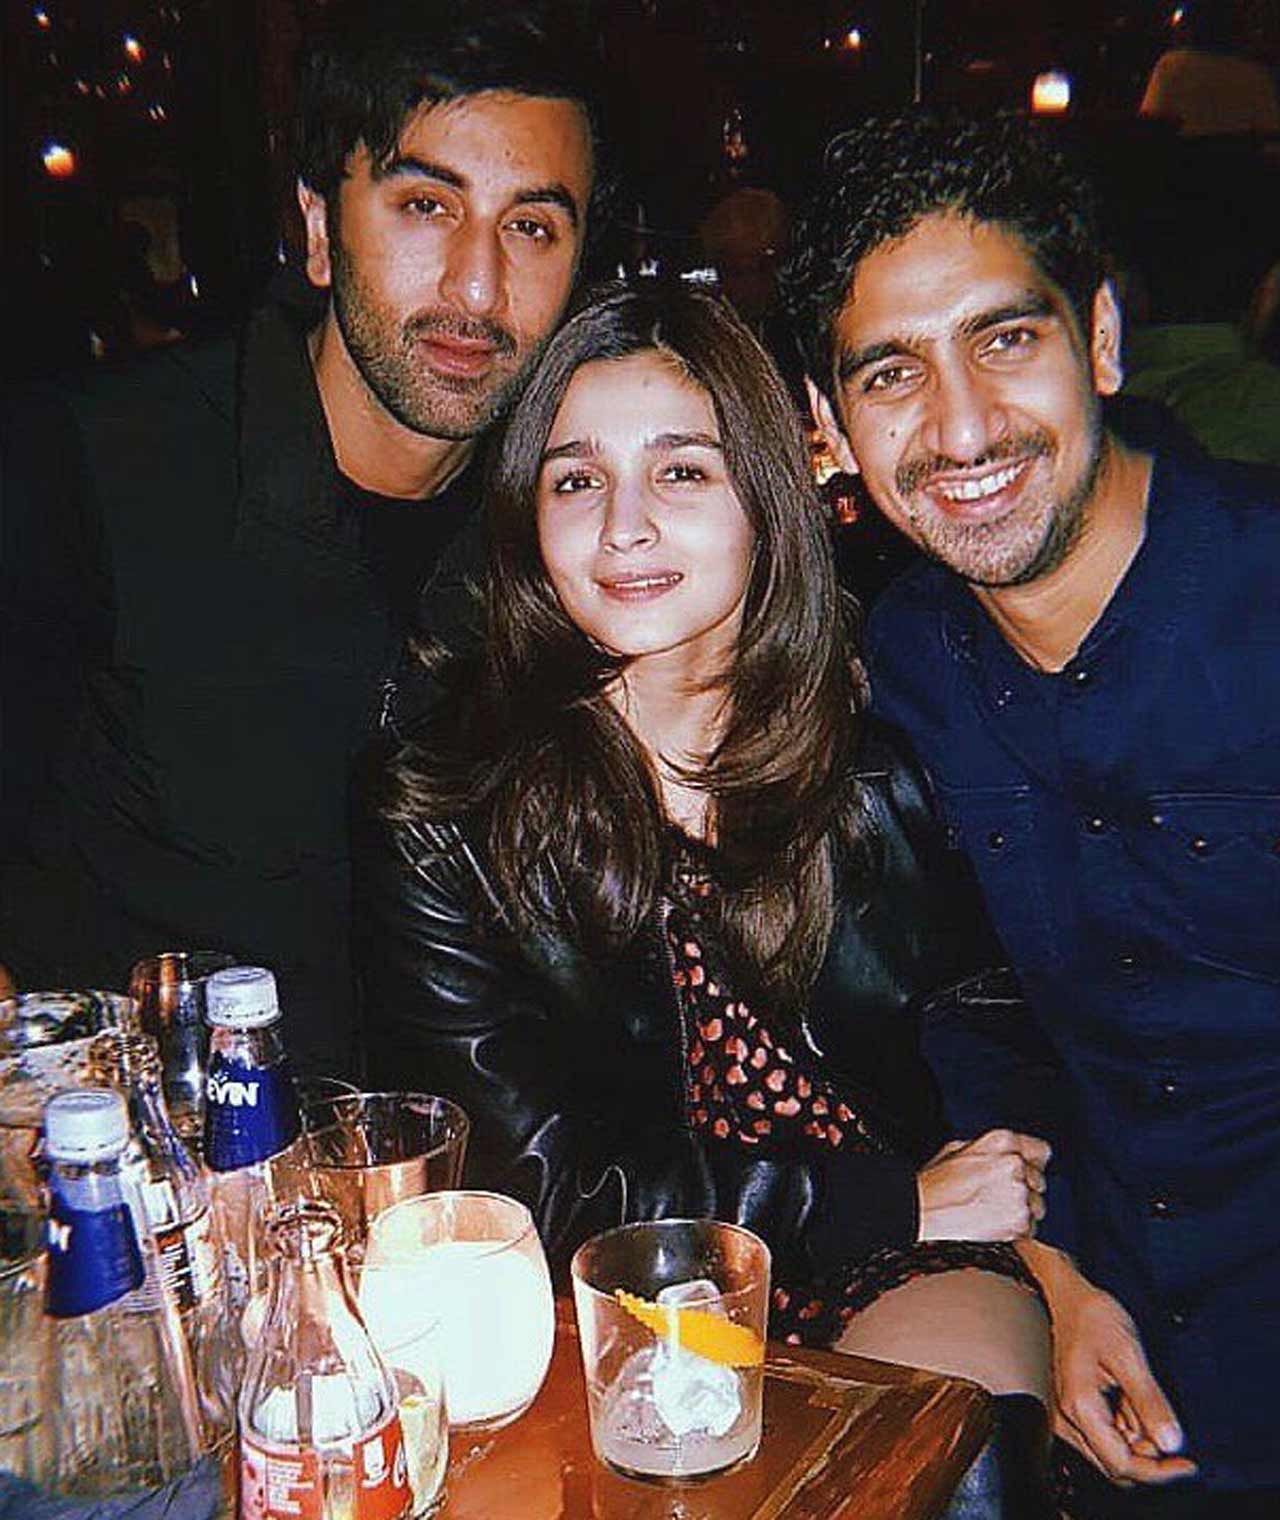 Alia Bhatt shared this picture with Brahmastra director Ayan Mukerji and beau Ranbir Kapoor as they partied together to celebrate their collaboration.